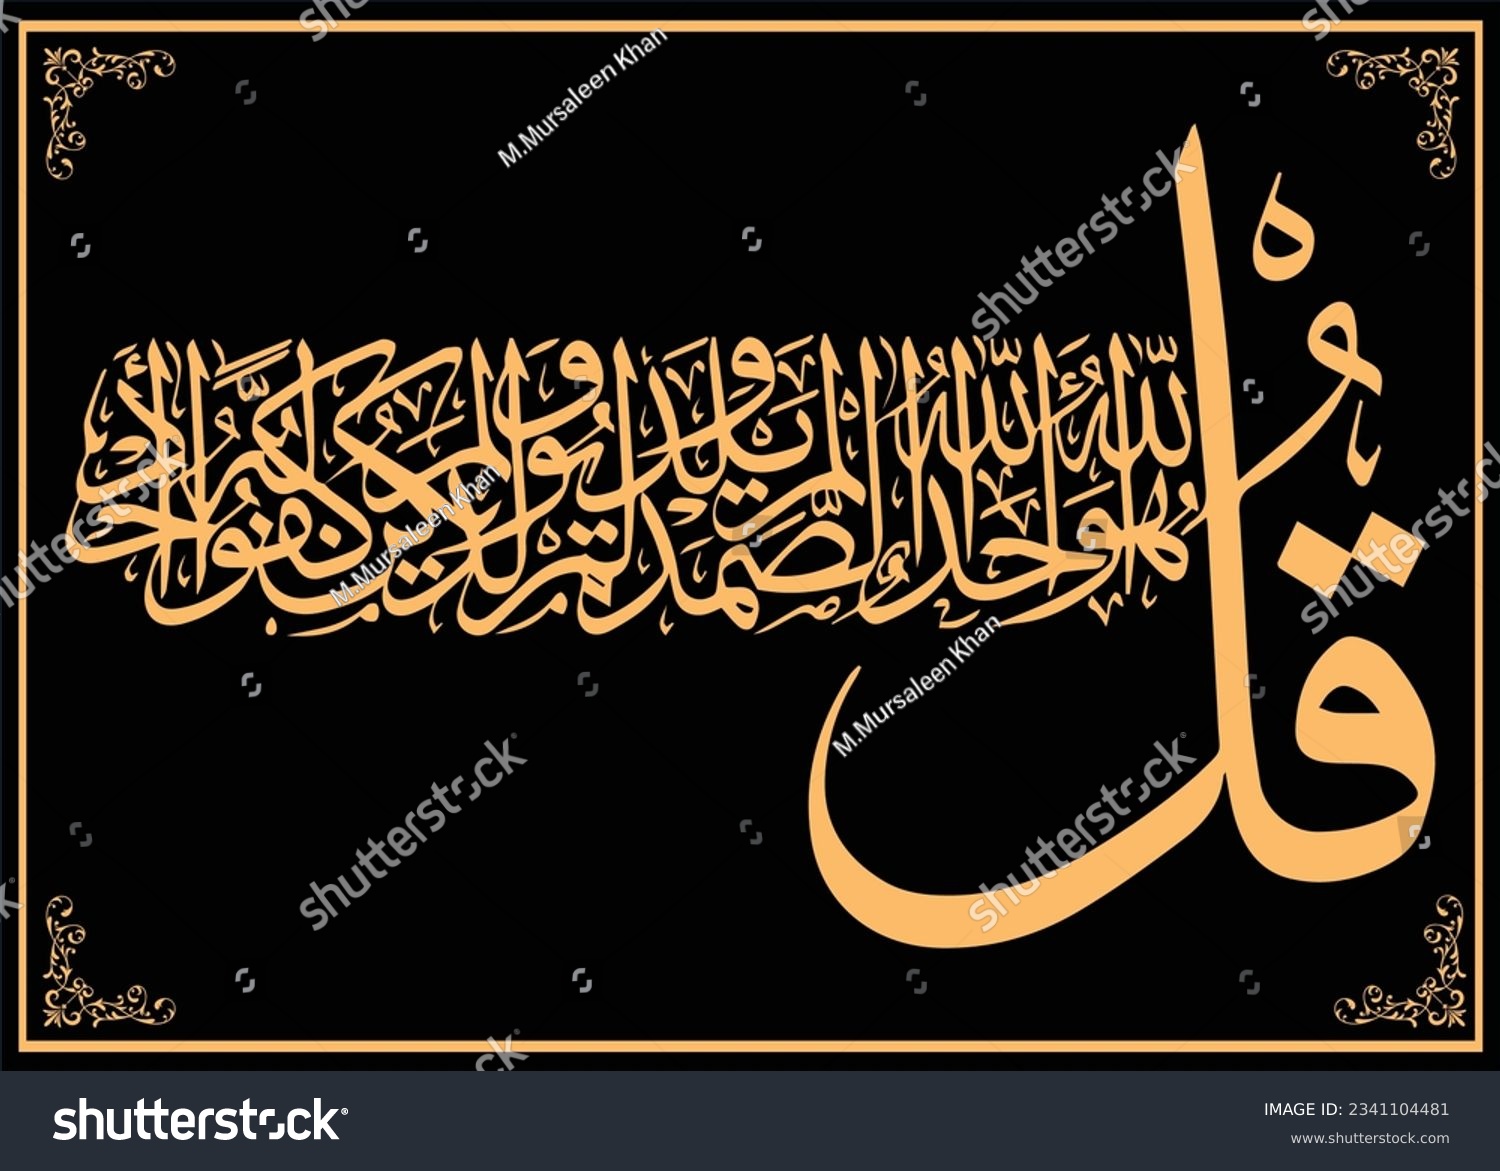 SVG of Composed calligraphy of 